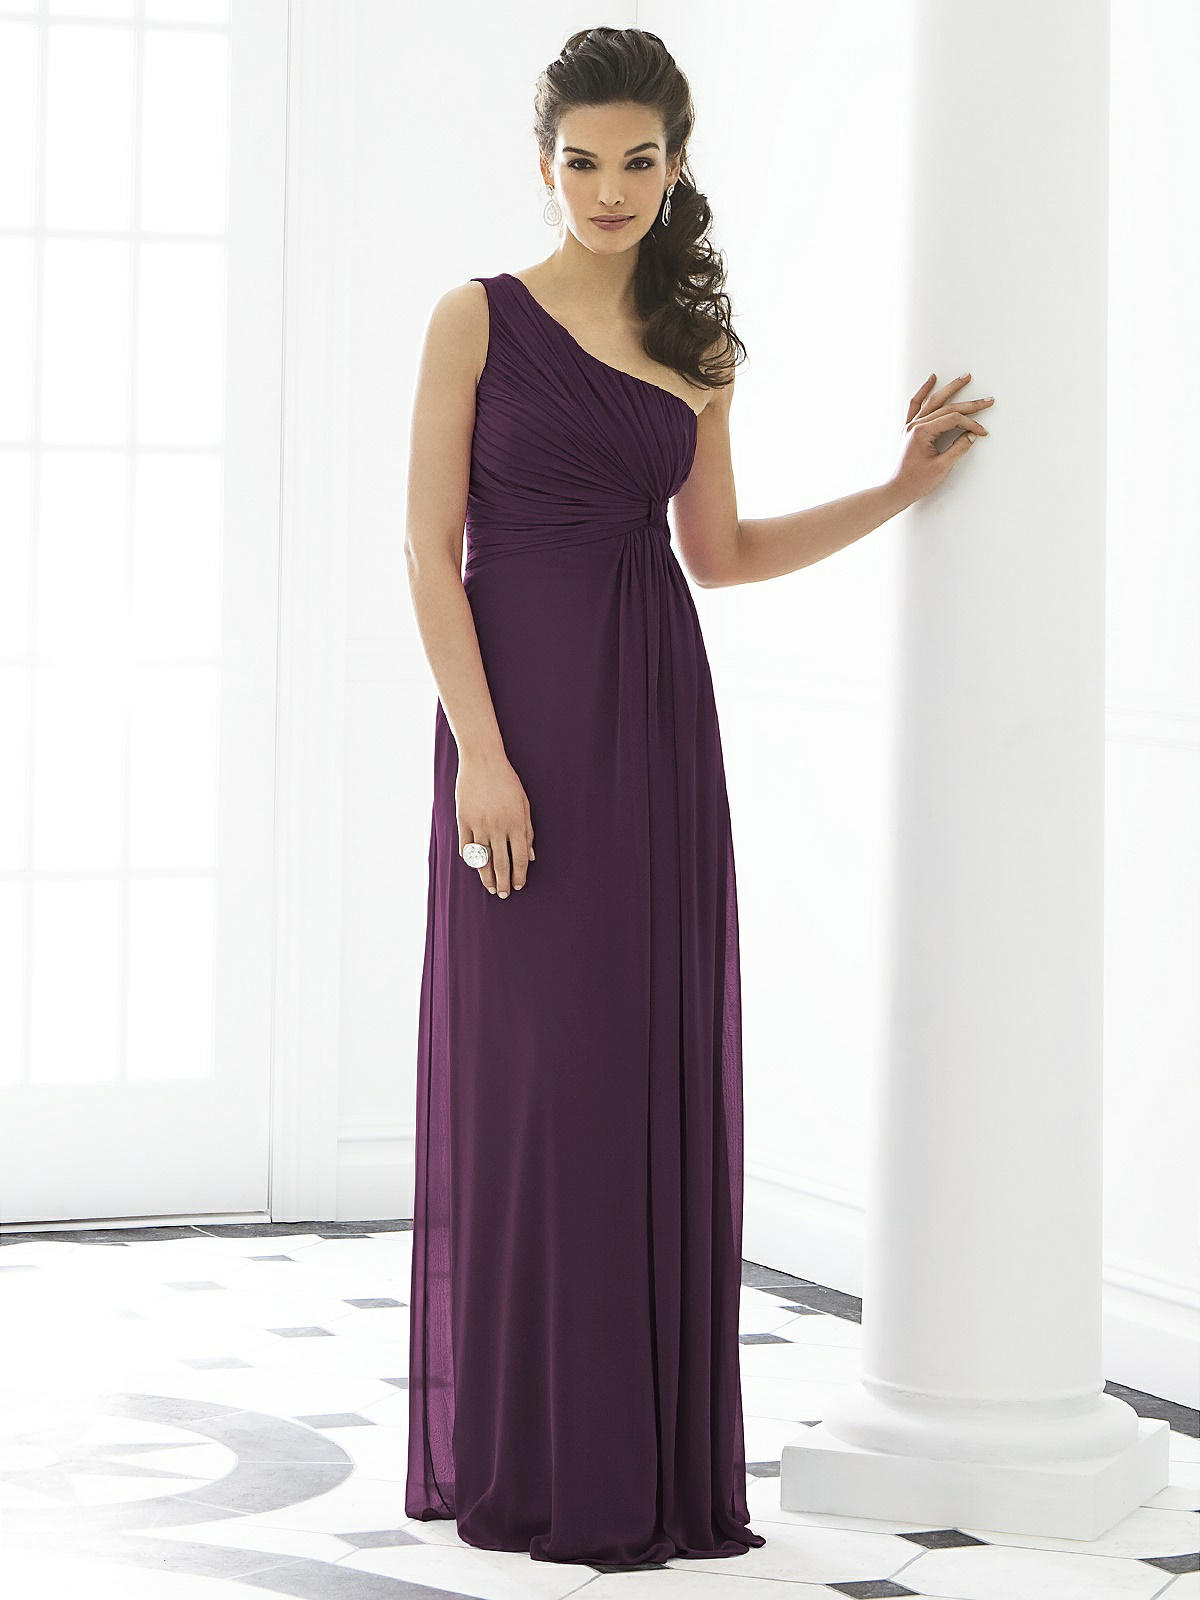 How Much Are Dessy Bridesmaid Dresses - Cocktail Dresses 2016